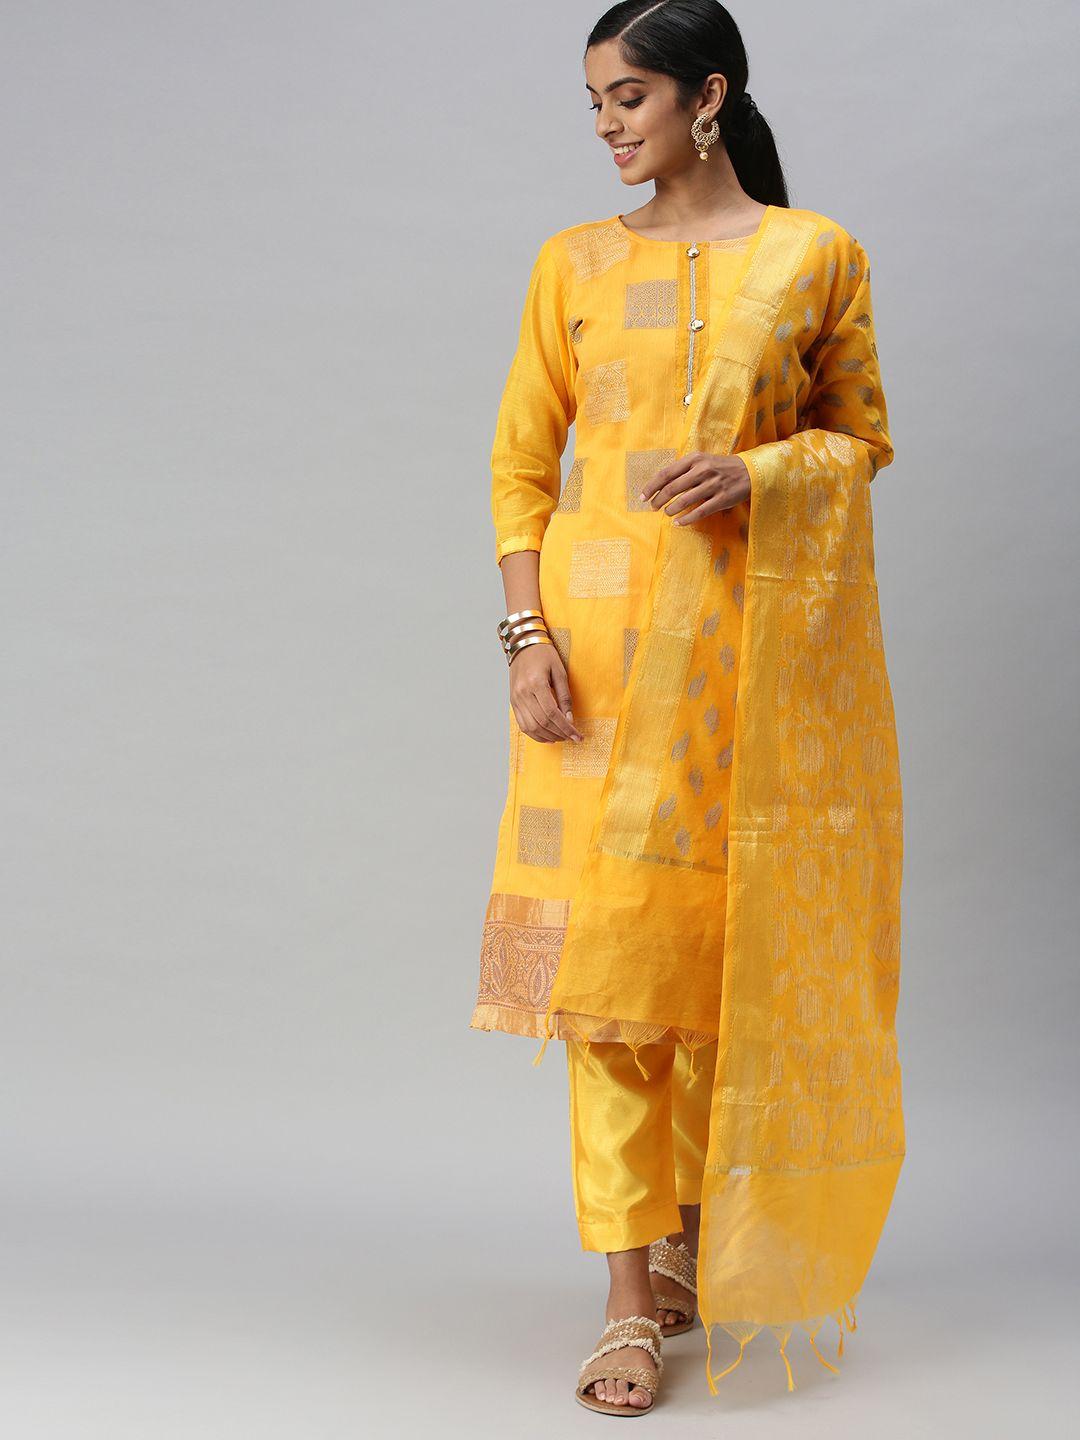 blissta yellow unstitched dress material